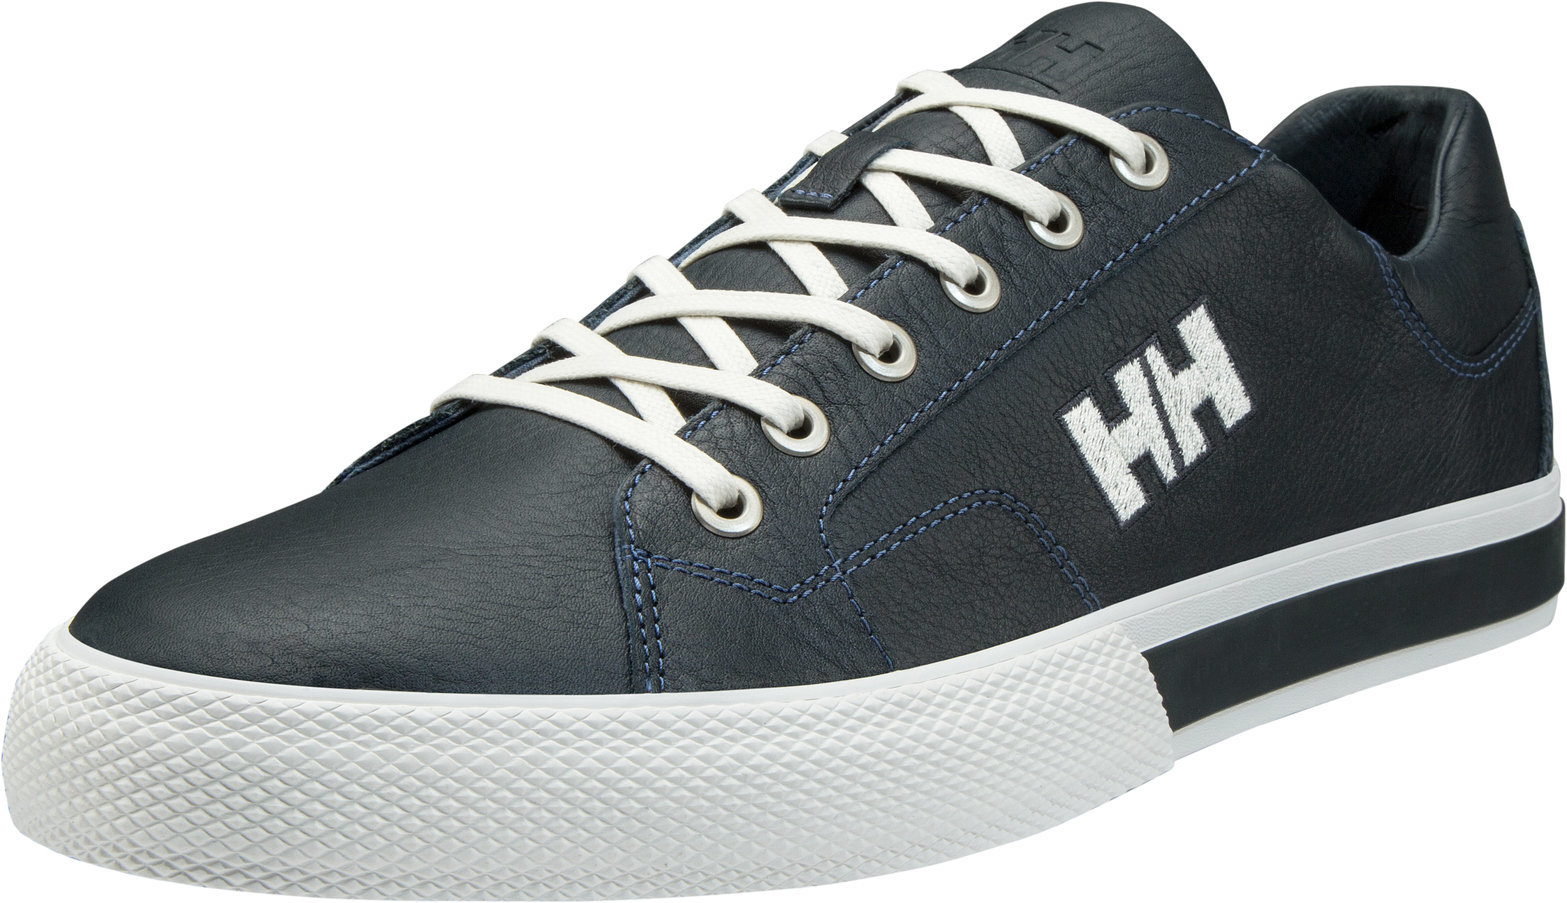 Mens Sailing Shoes Helly Hansen Fjord LV-2 Off Navy - 44.5